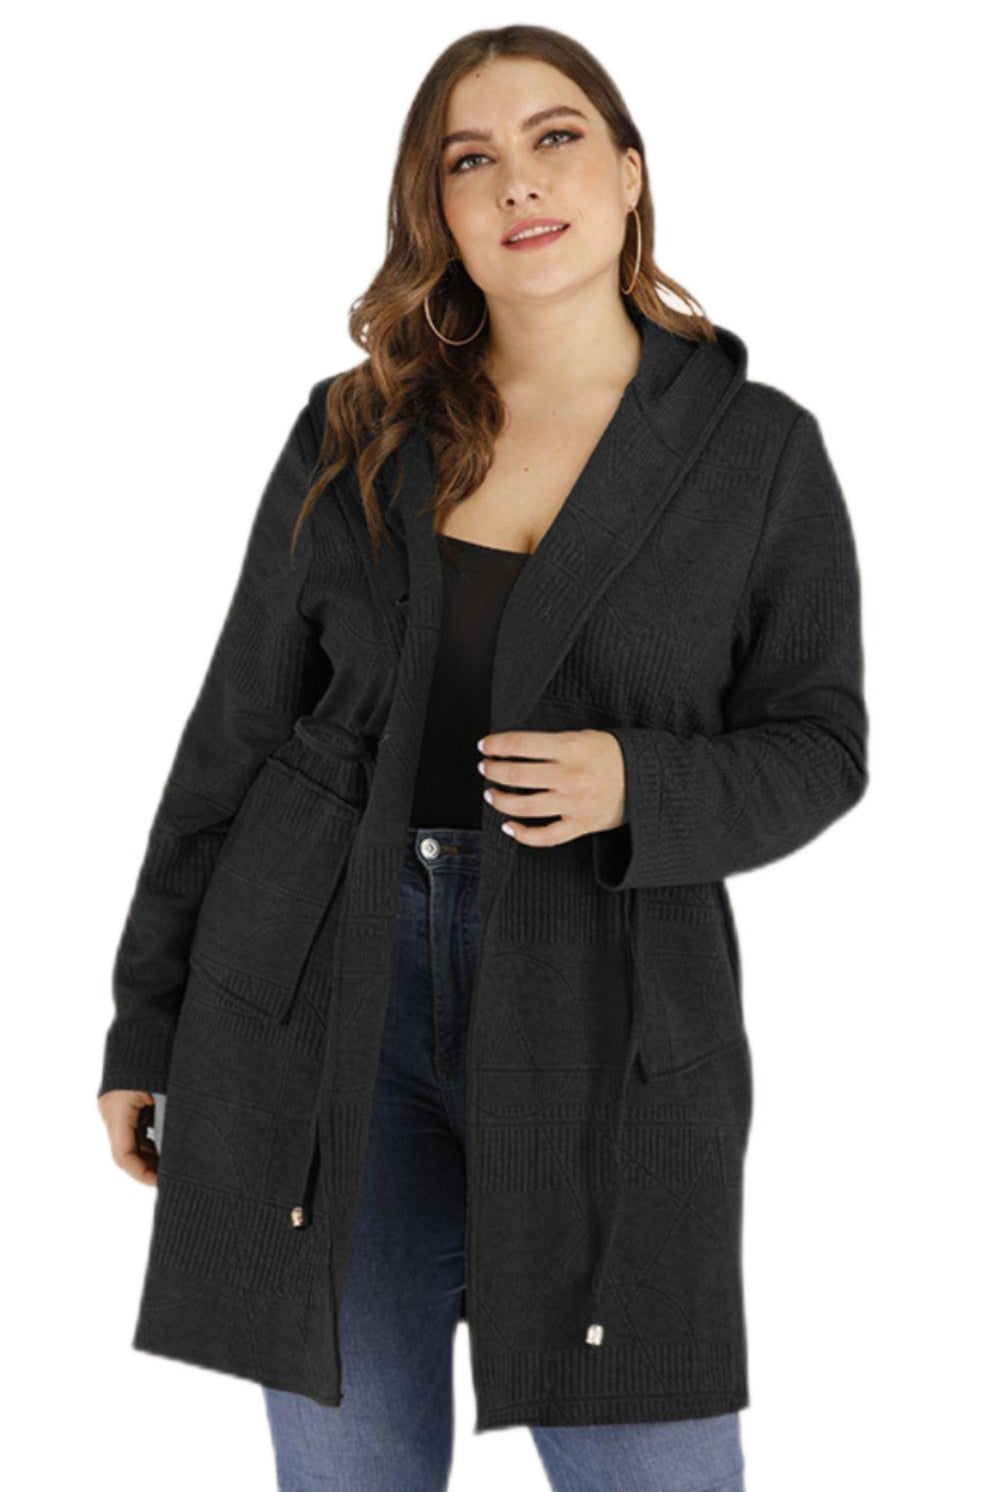 Women's Sweaters - Cardigans Plus Size Drawstring Waist Hooded Cardigan With Pockets